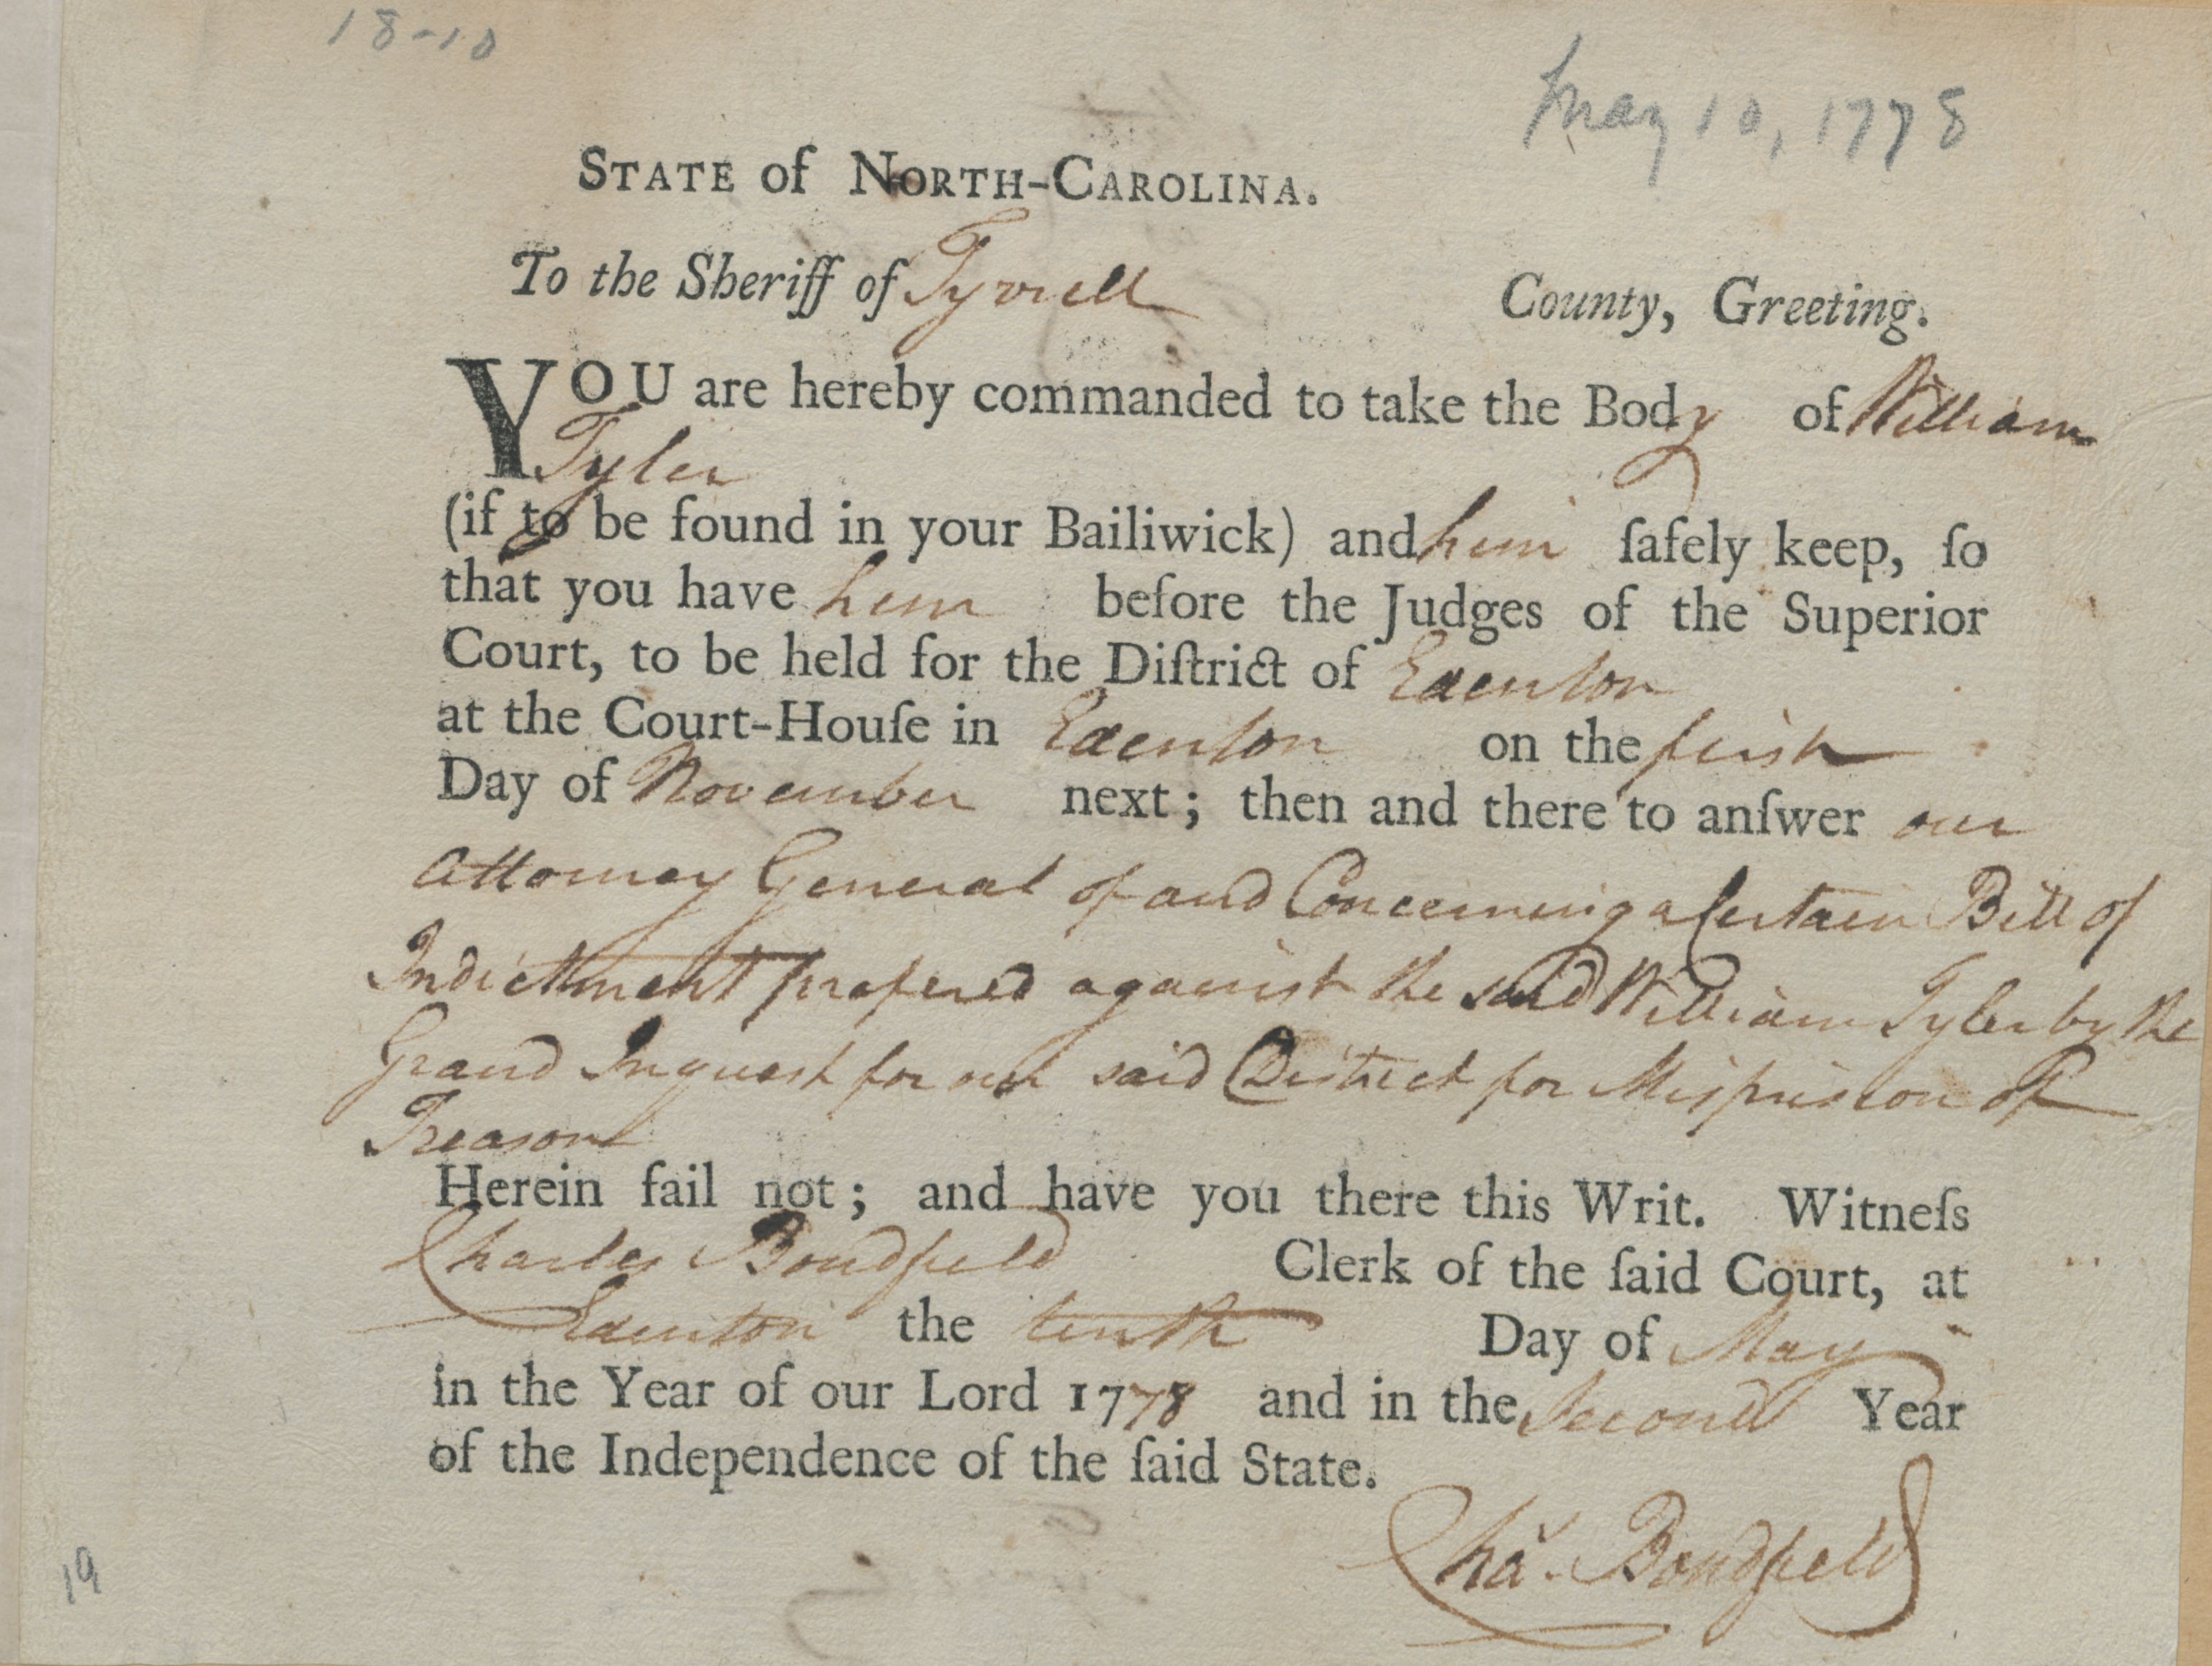 Bench Warrant from Charles Bondfield to the Tyrrell County Sheriff for William Tyler, 10 May 1778, page 1